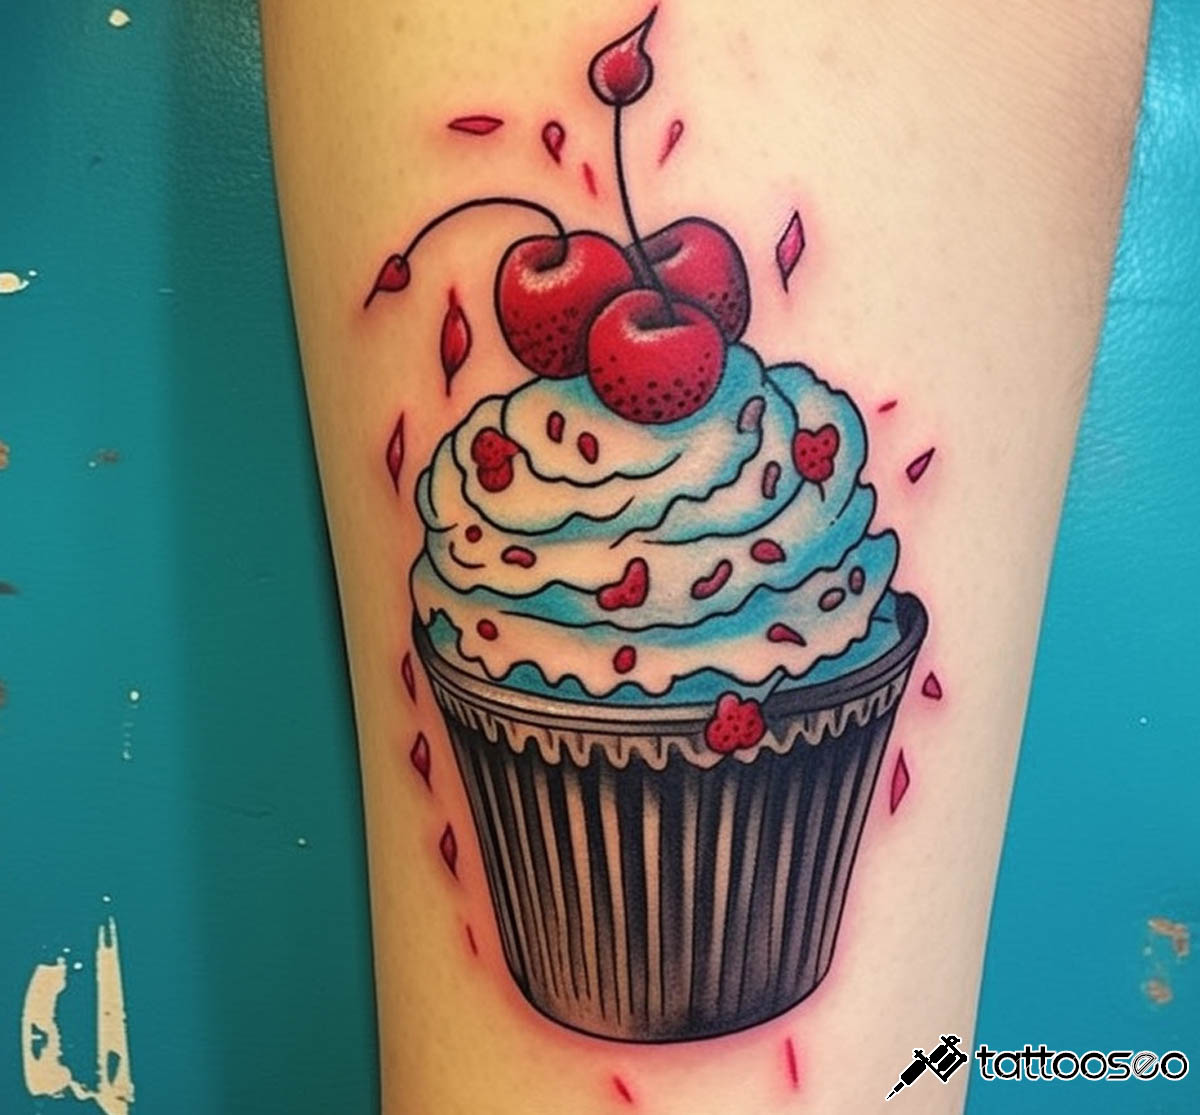 Cupcake tattoo meaning